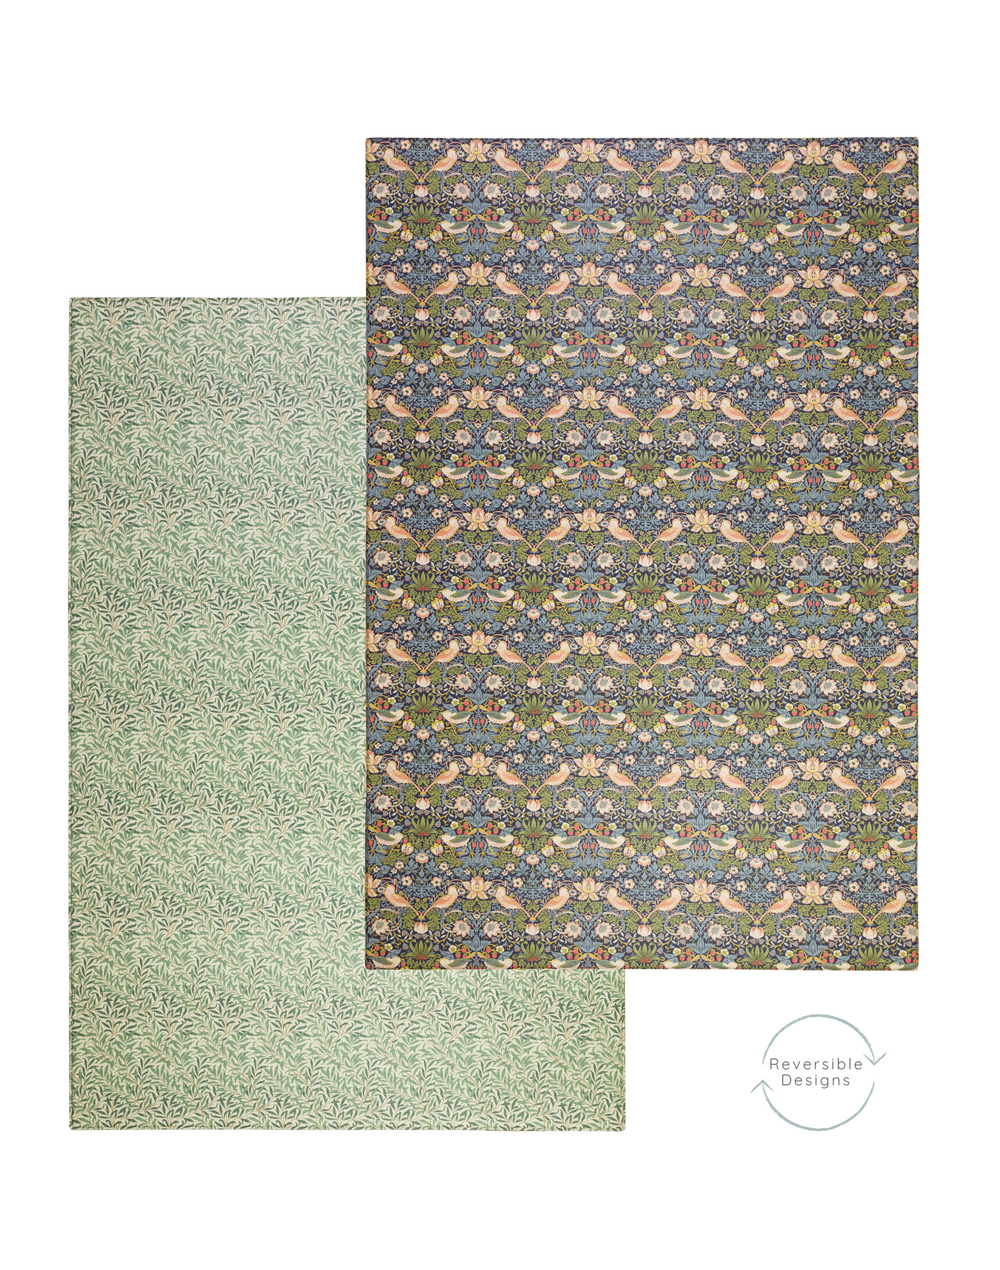 reversible playmat with iconic heritage designs willow boughs and strawberry thief by morris and co. ideal for styling into modern family spaces